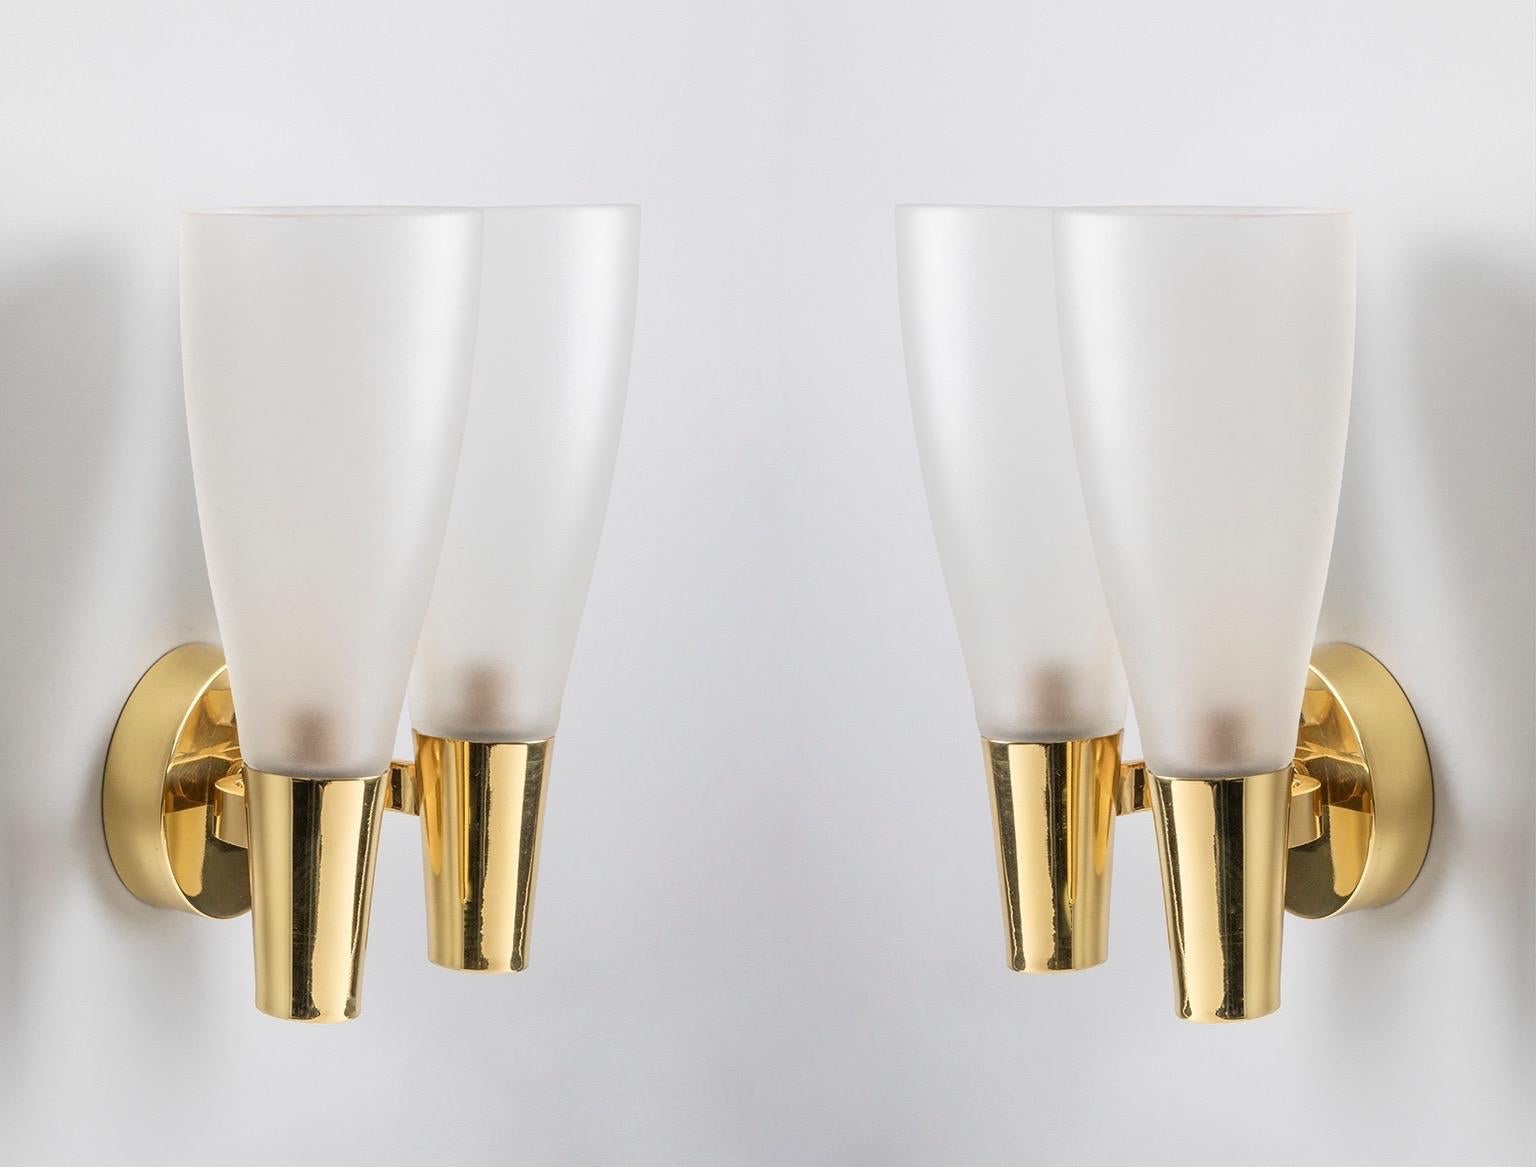 Pietro Chiesa (1892-1948) 

A refined and modern pair of sconces by modernist glass master Pietro Chiesa for Fontana Arte, with two tapered frosted glass shades supported by polished brass mounts anchored in a large, thick brass disk. Together,